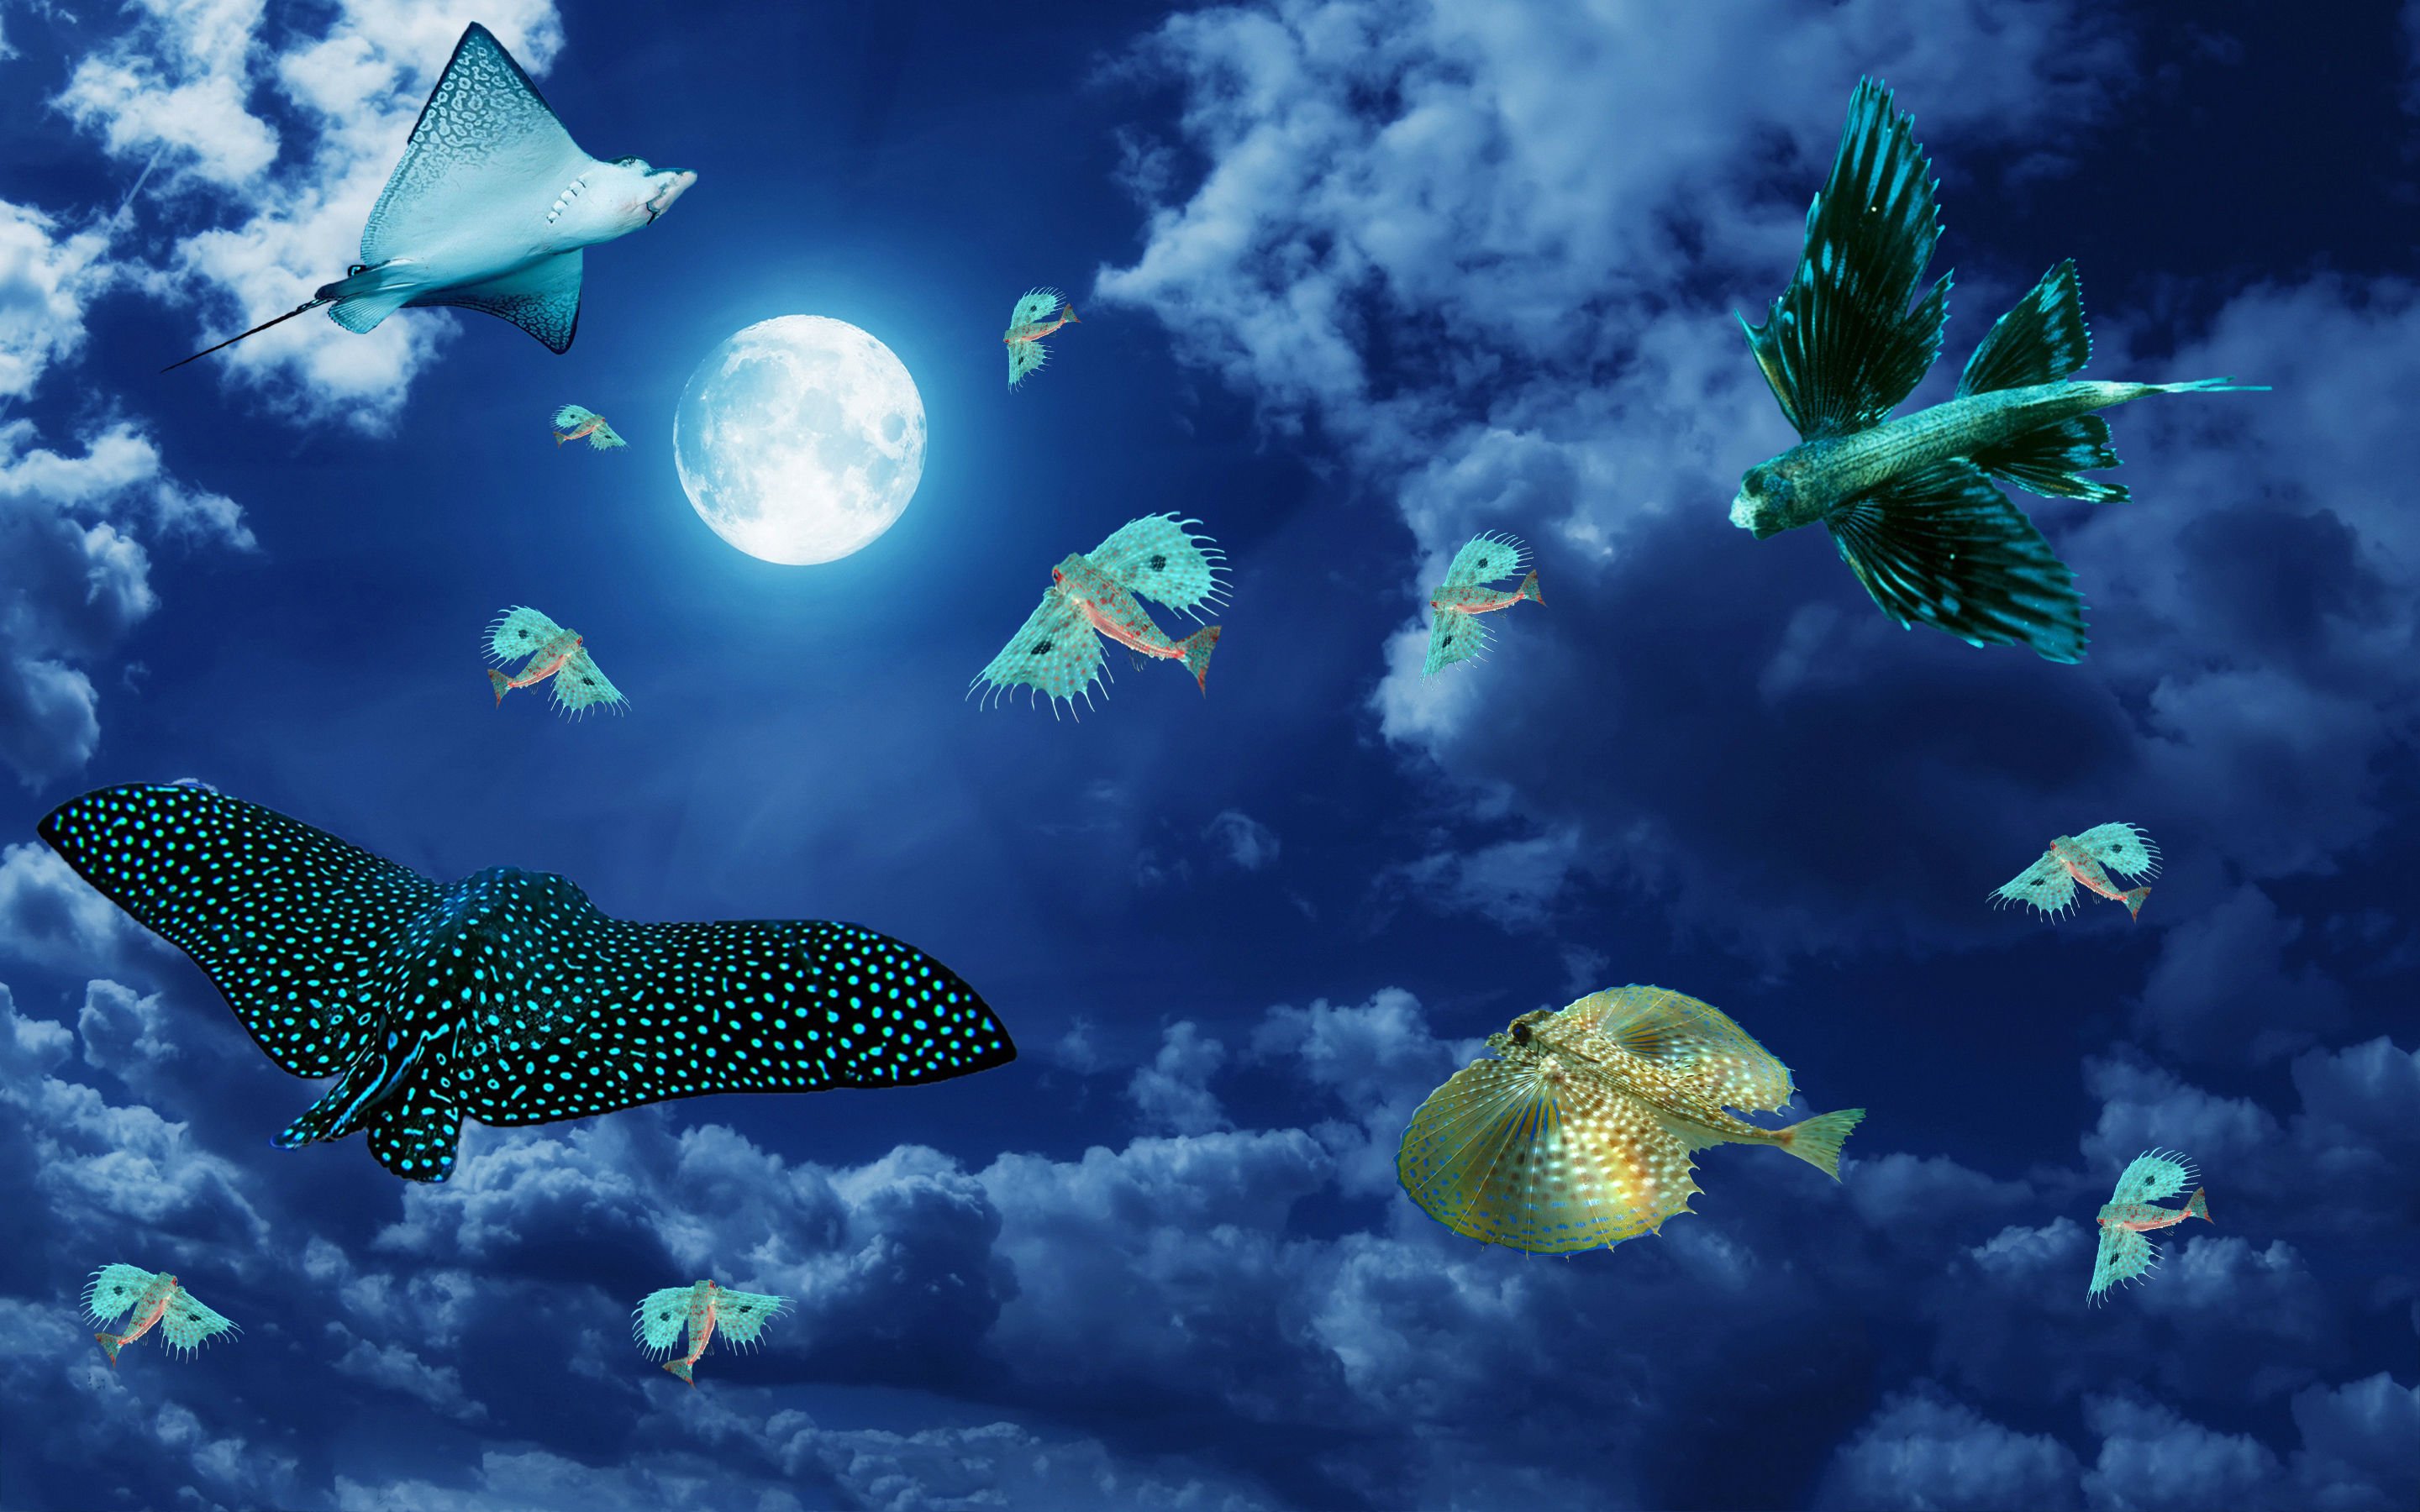 fish, Fishes, Photoshop, Psychedelic, Moon, Art, Artwork Wallpaper